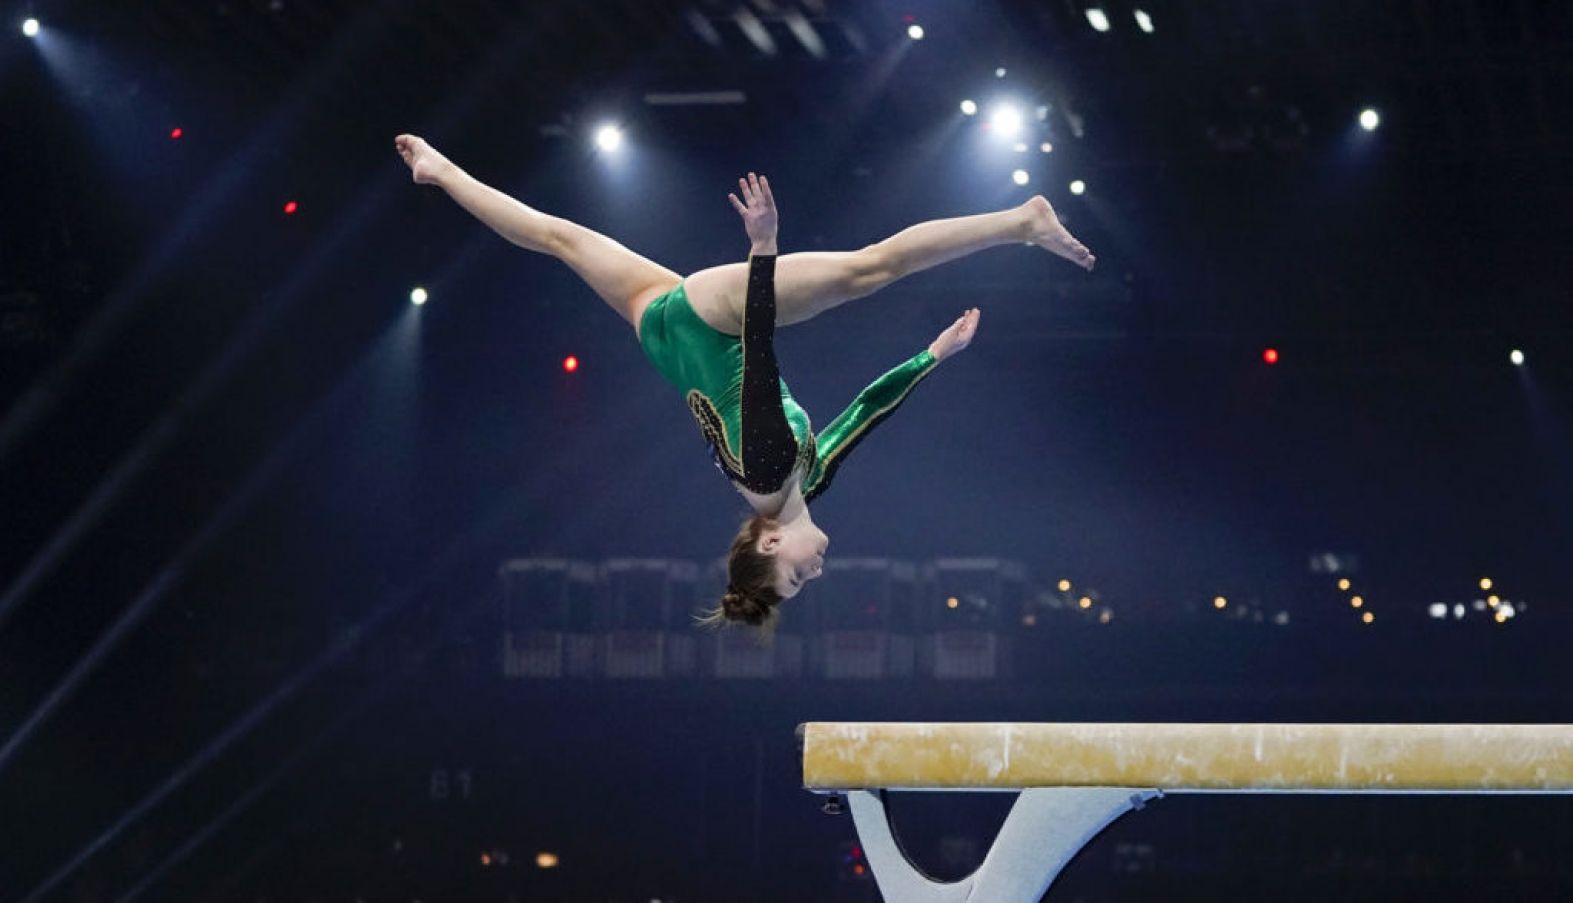 Emma Slevin Competes For Ireland In The 2020 Olympic Games Women's Artistic Qualifying Round.
©Inpho/Claudio Thoma